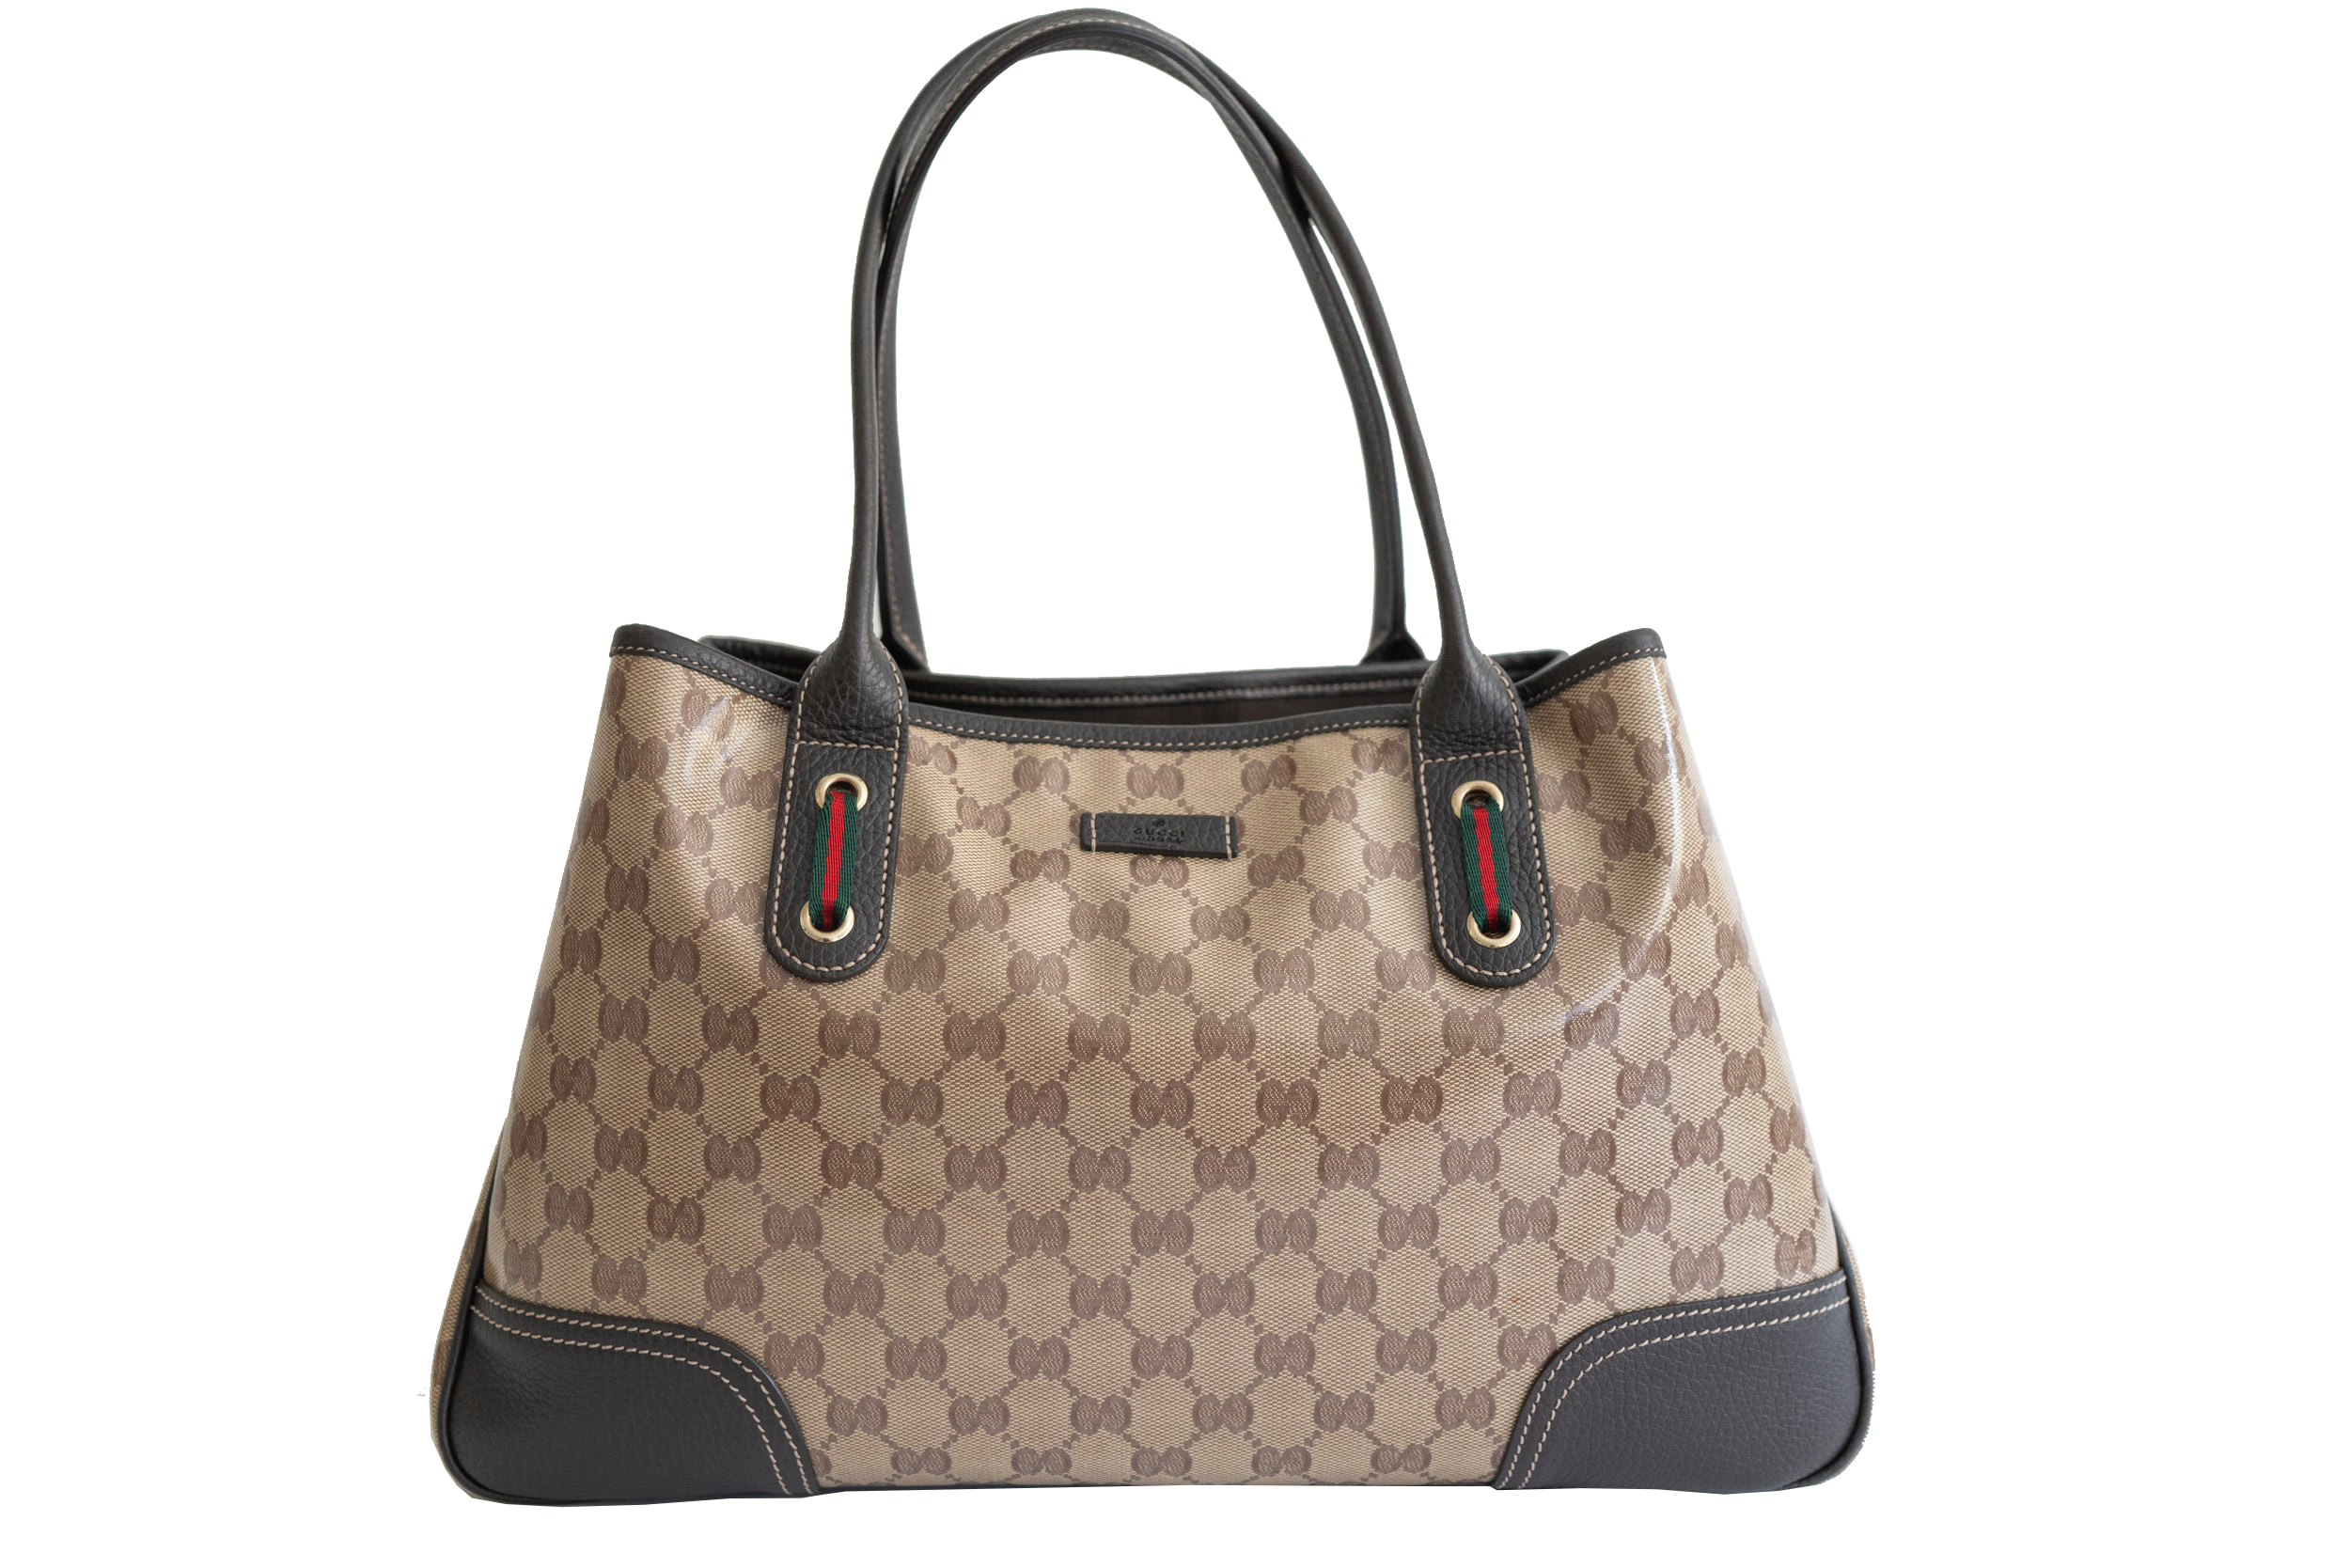 Shoulder Tote Bag | Rent Luxury Bags at Luxury Fashion Rentals